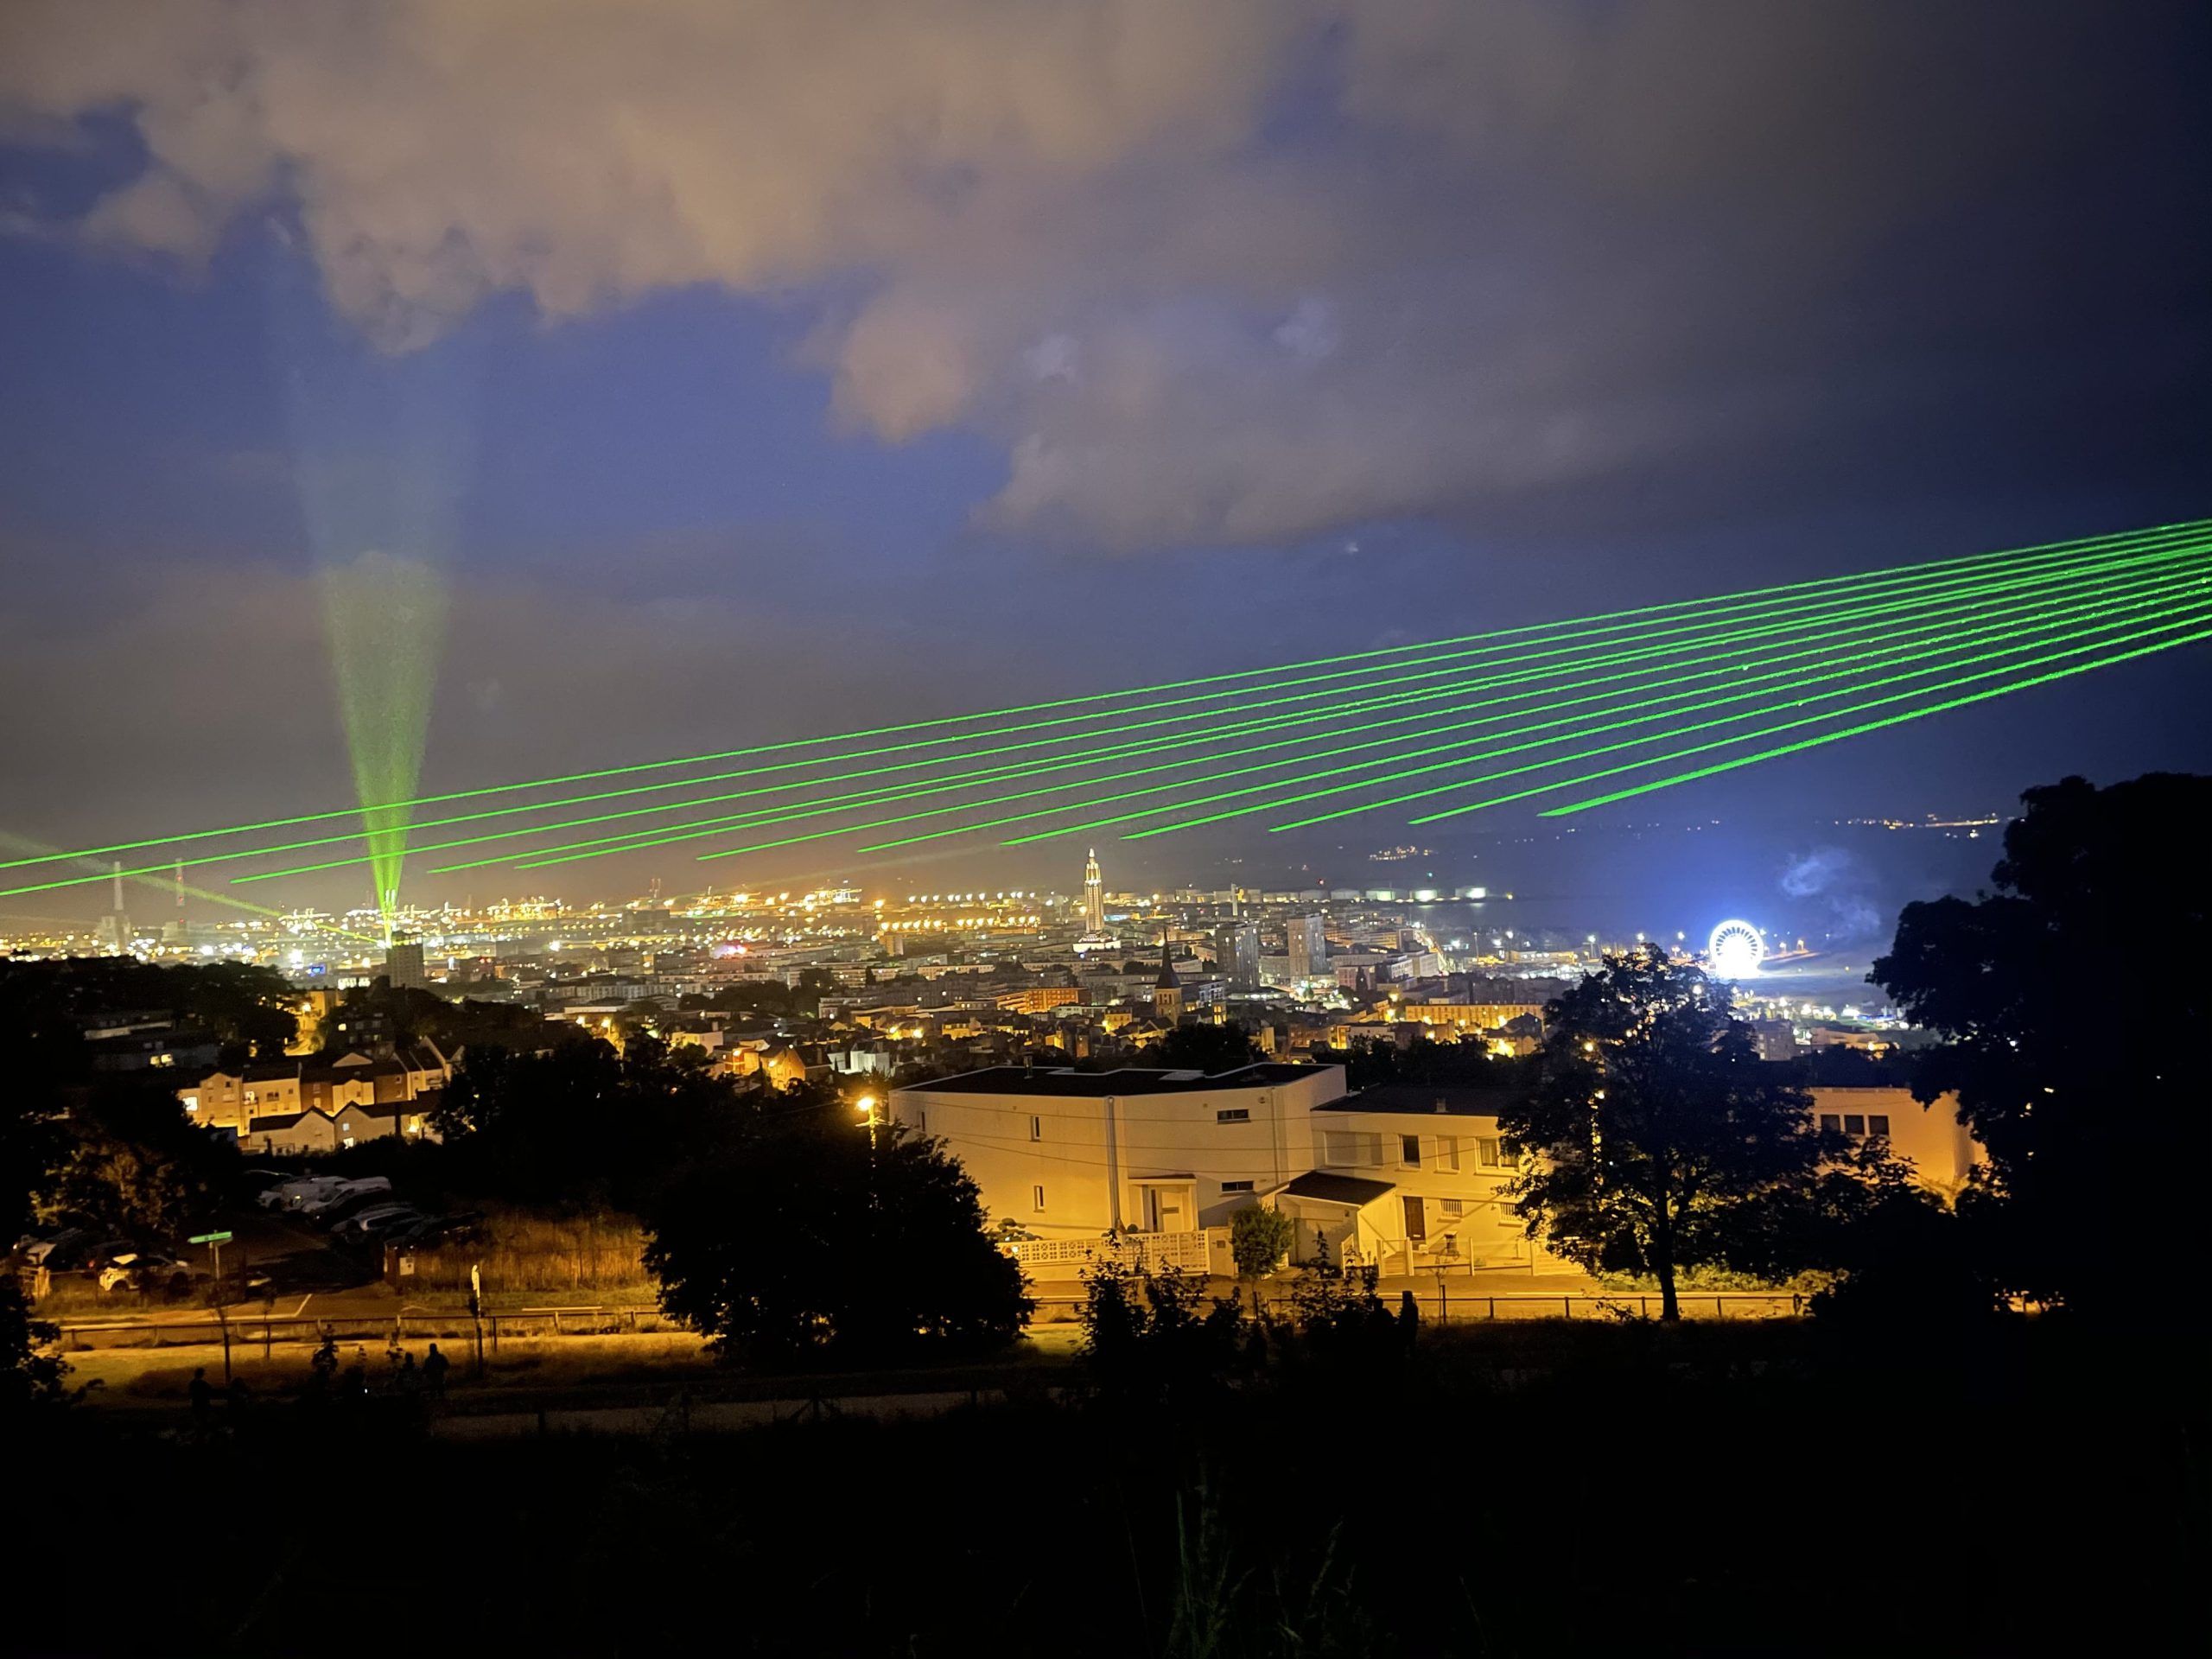 Europe Évènement - Photo of green laser beams projected above a city in Le Havre